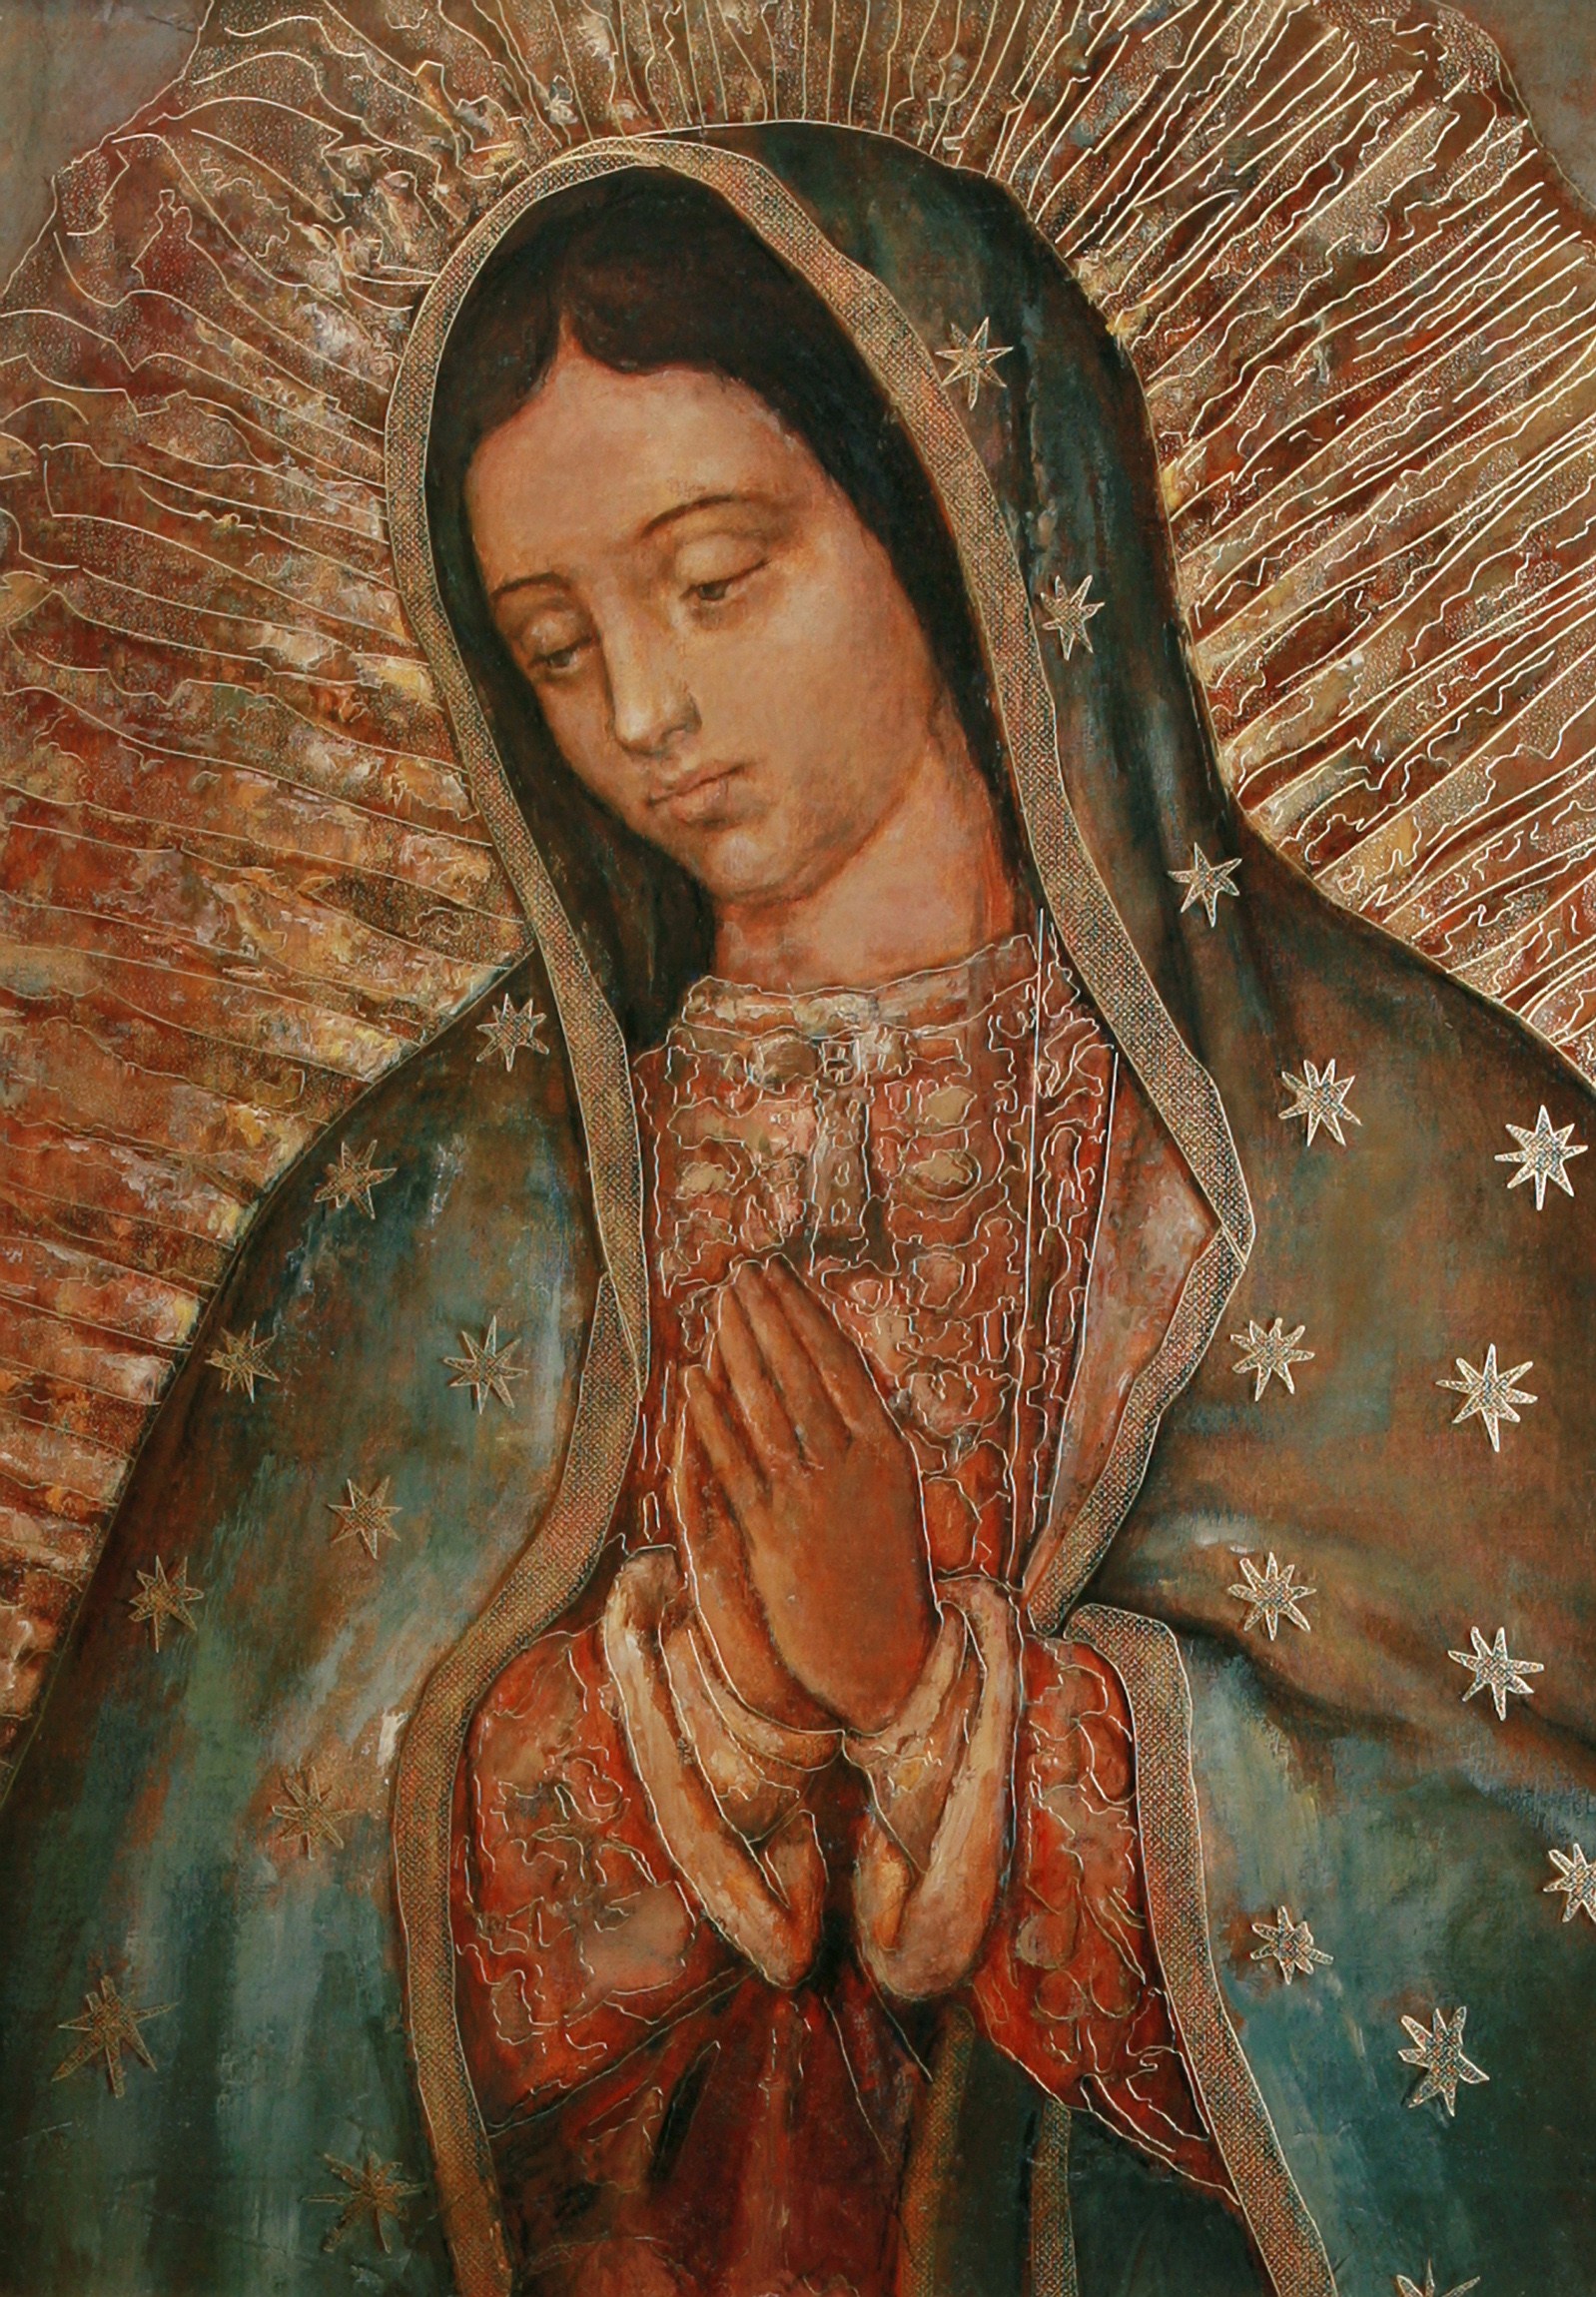 feast-day-of-our-lady-of-guadalupe-12-12-13-the-magickal-musings-of